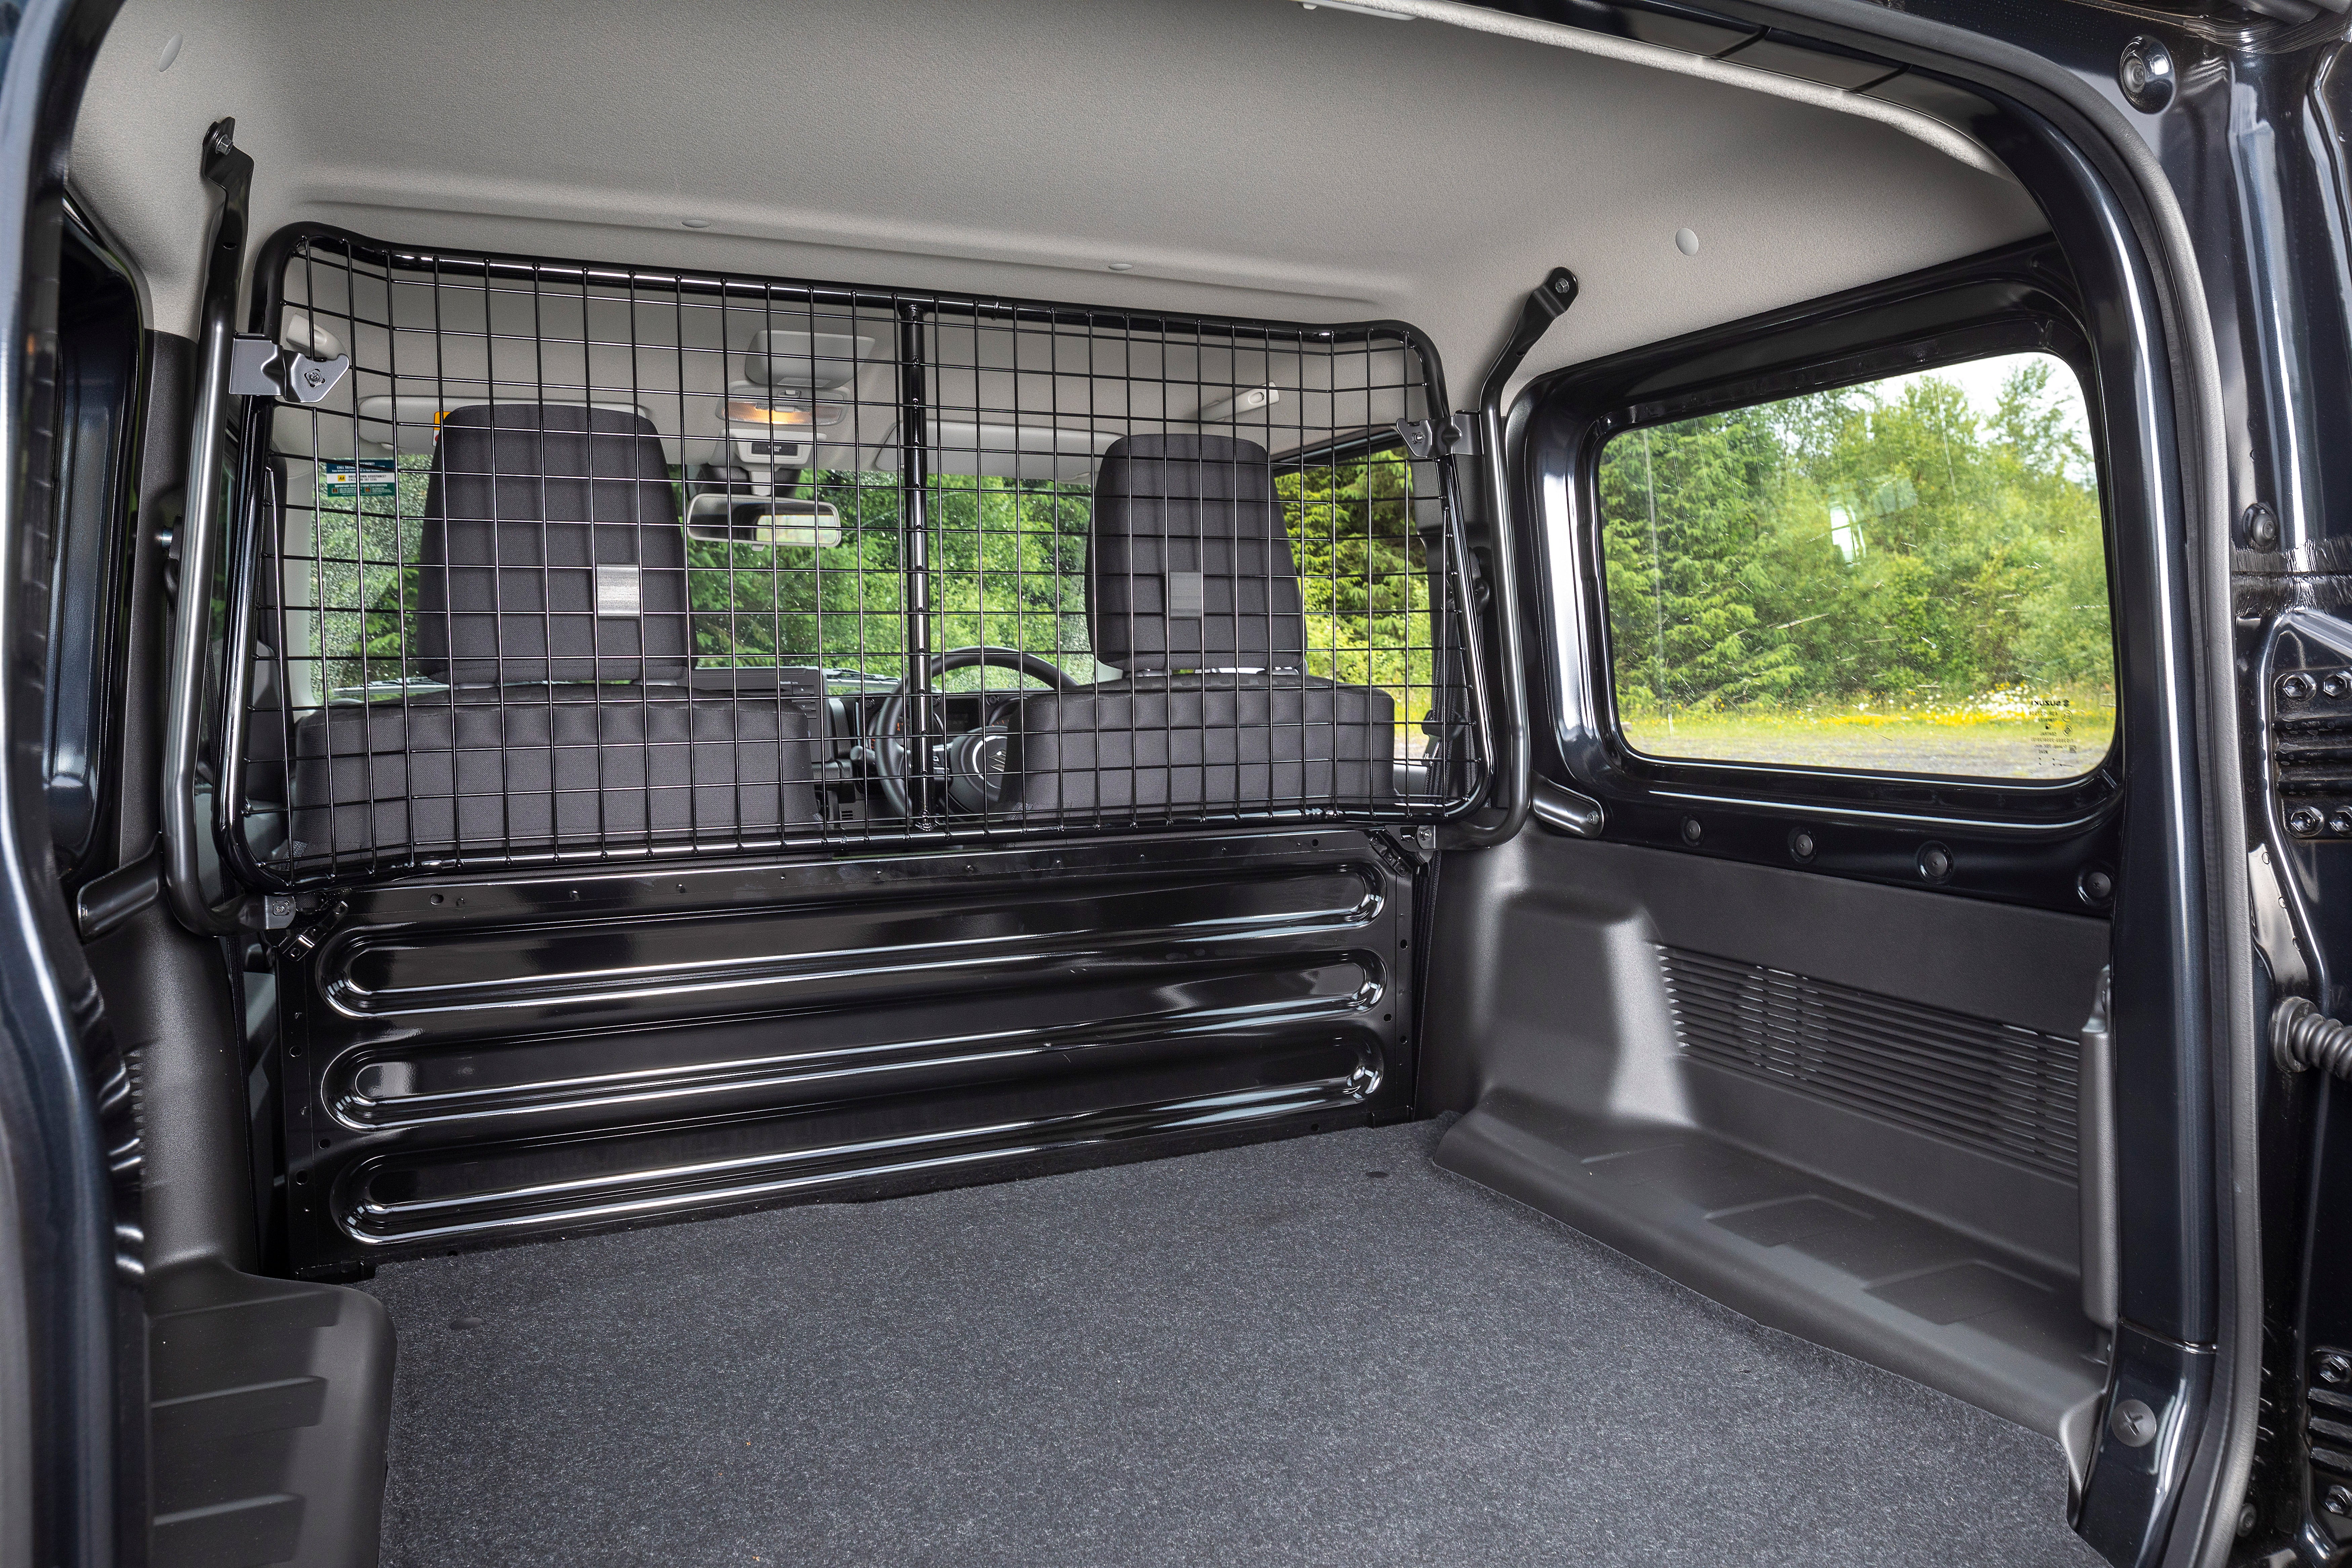 The Jimny van has a maximum payload of 150kg while its loadspace measures 939mm in length and 1295mm wide